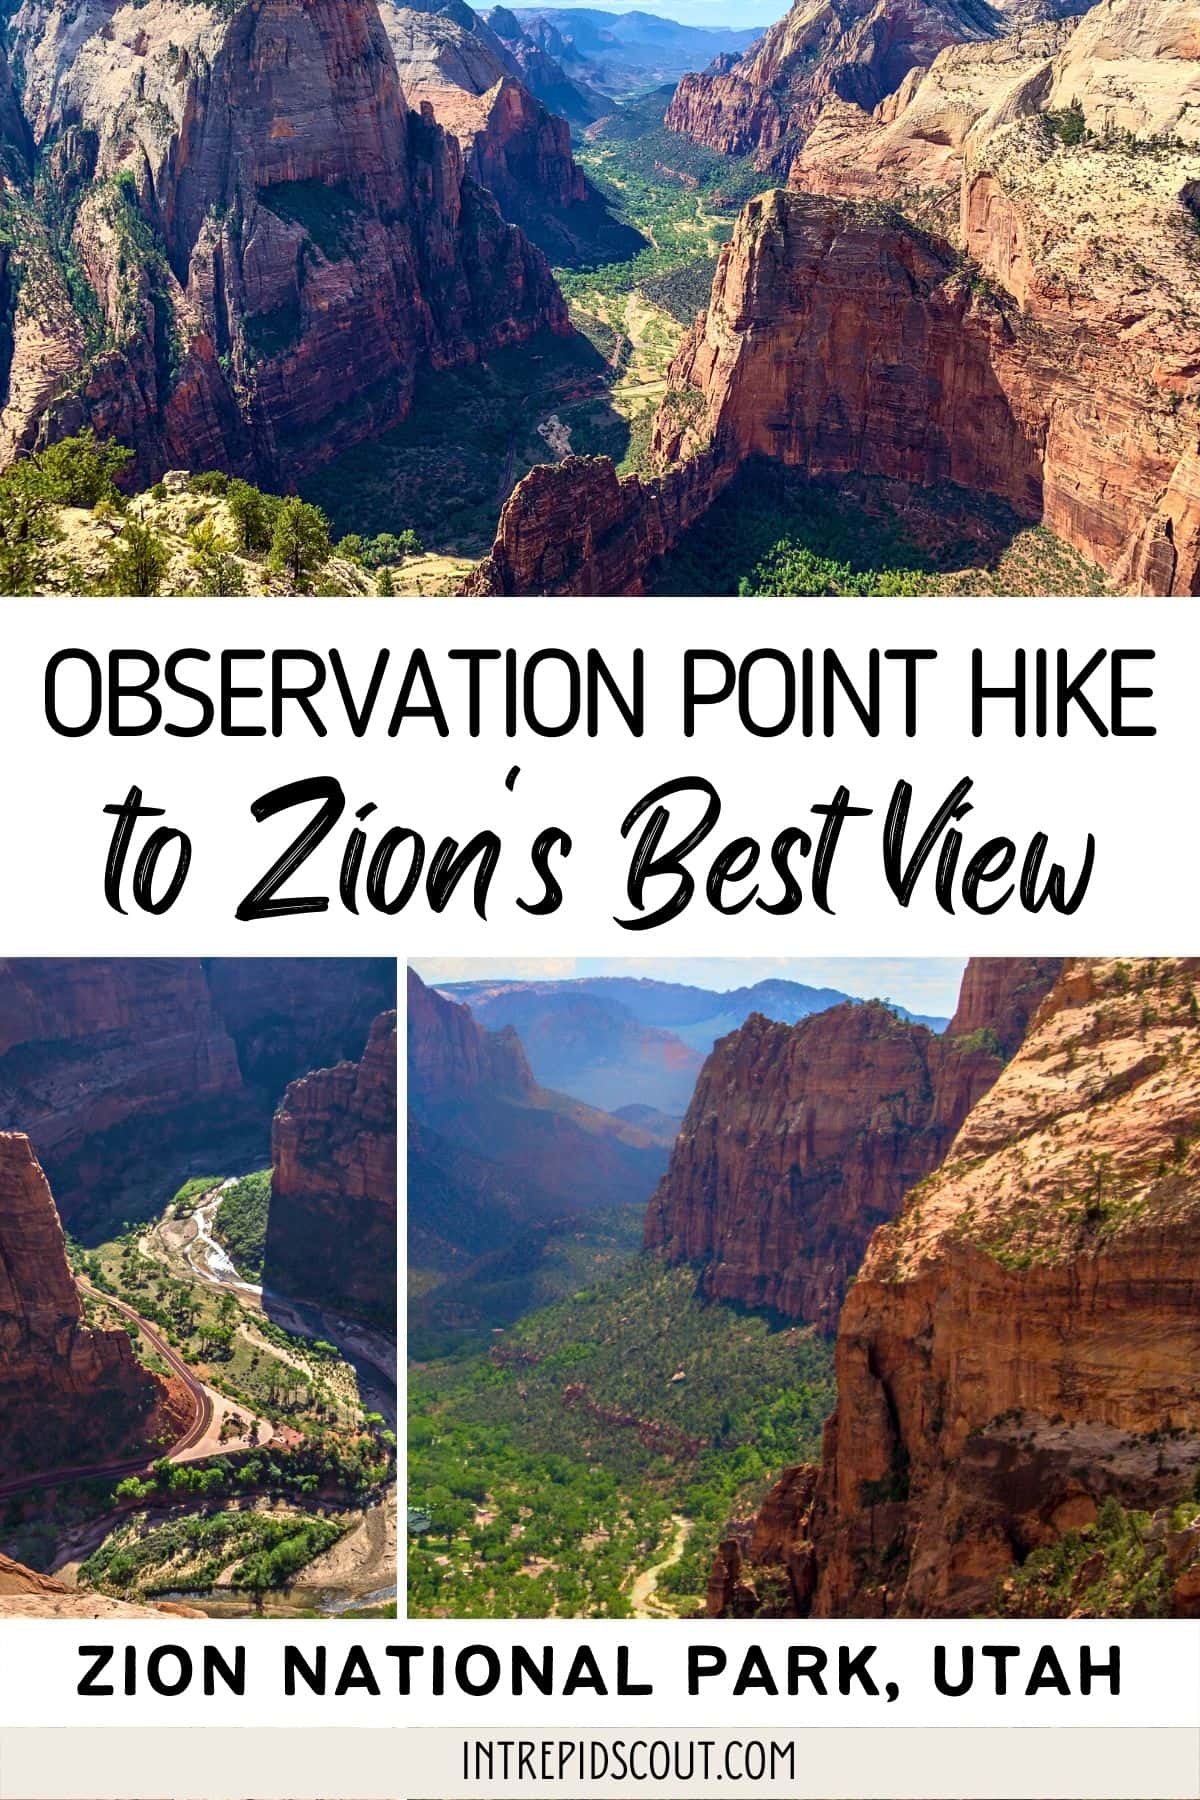 Observation Point Hike to Zion's Best View